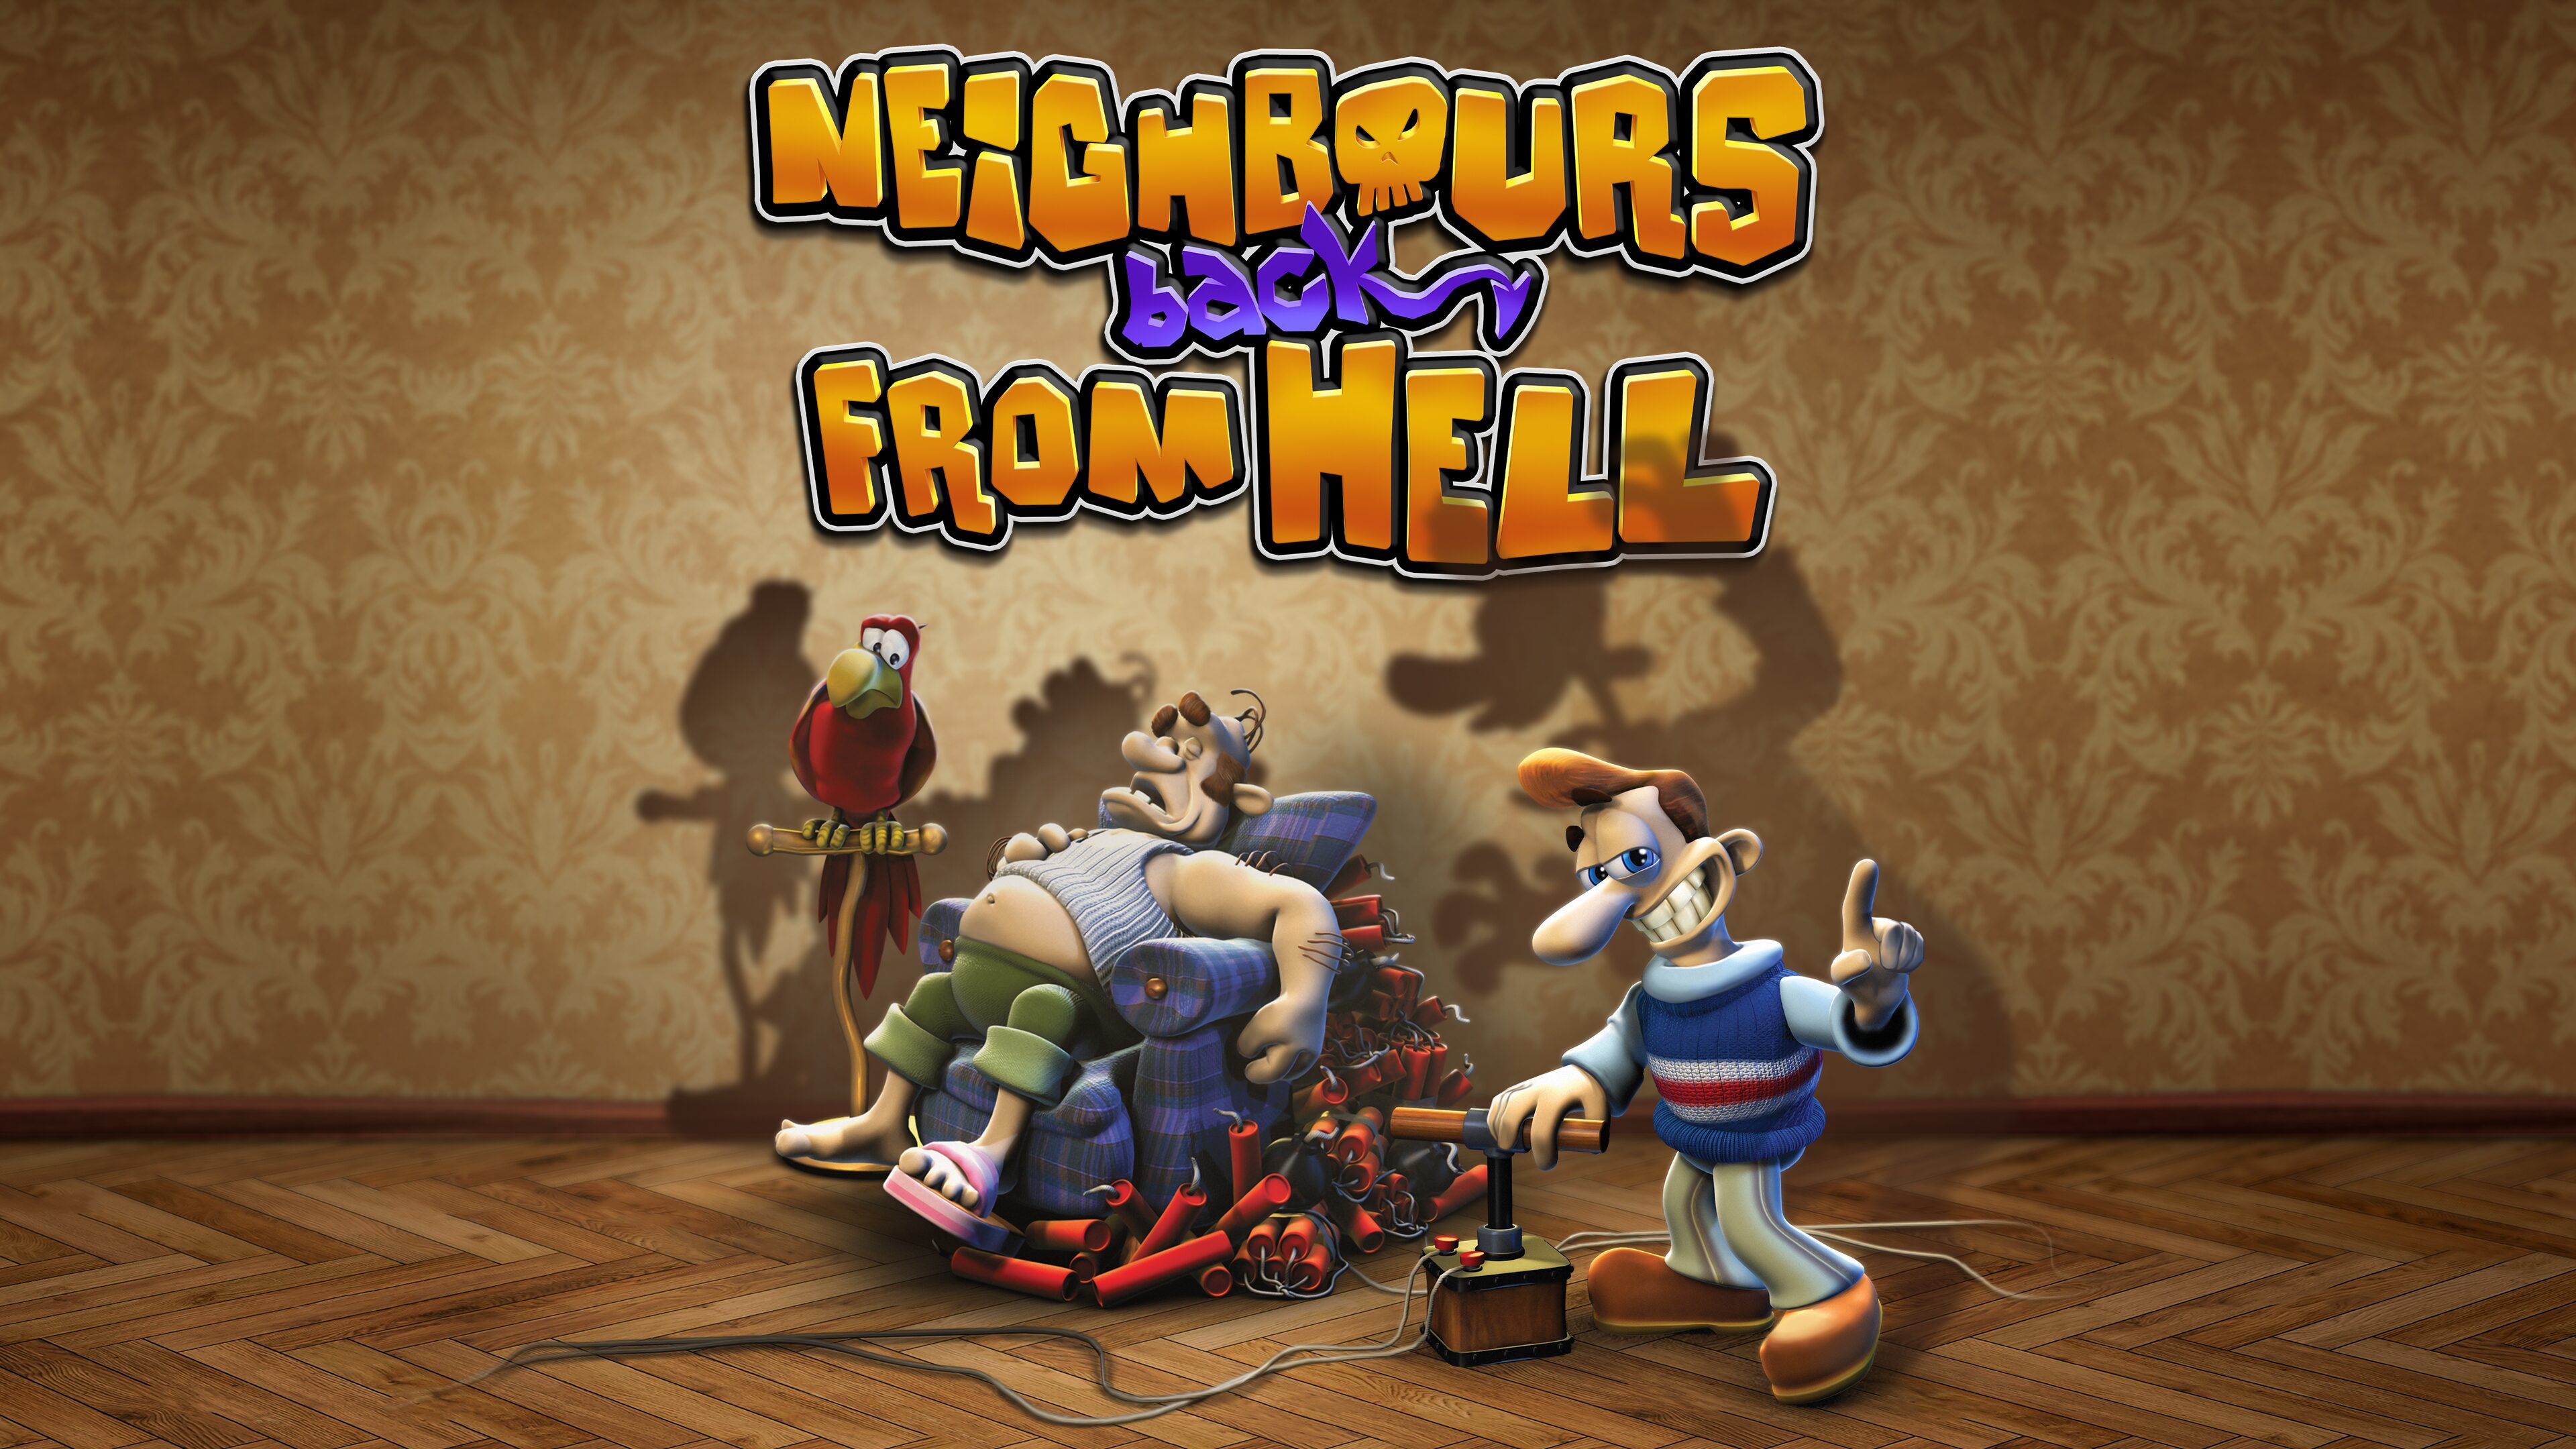 neighbours from hell 1